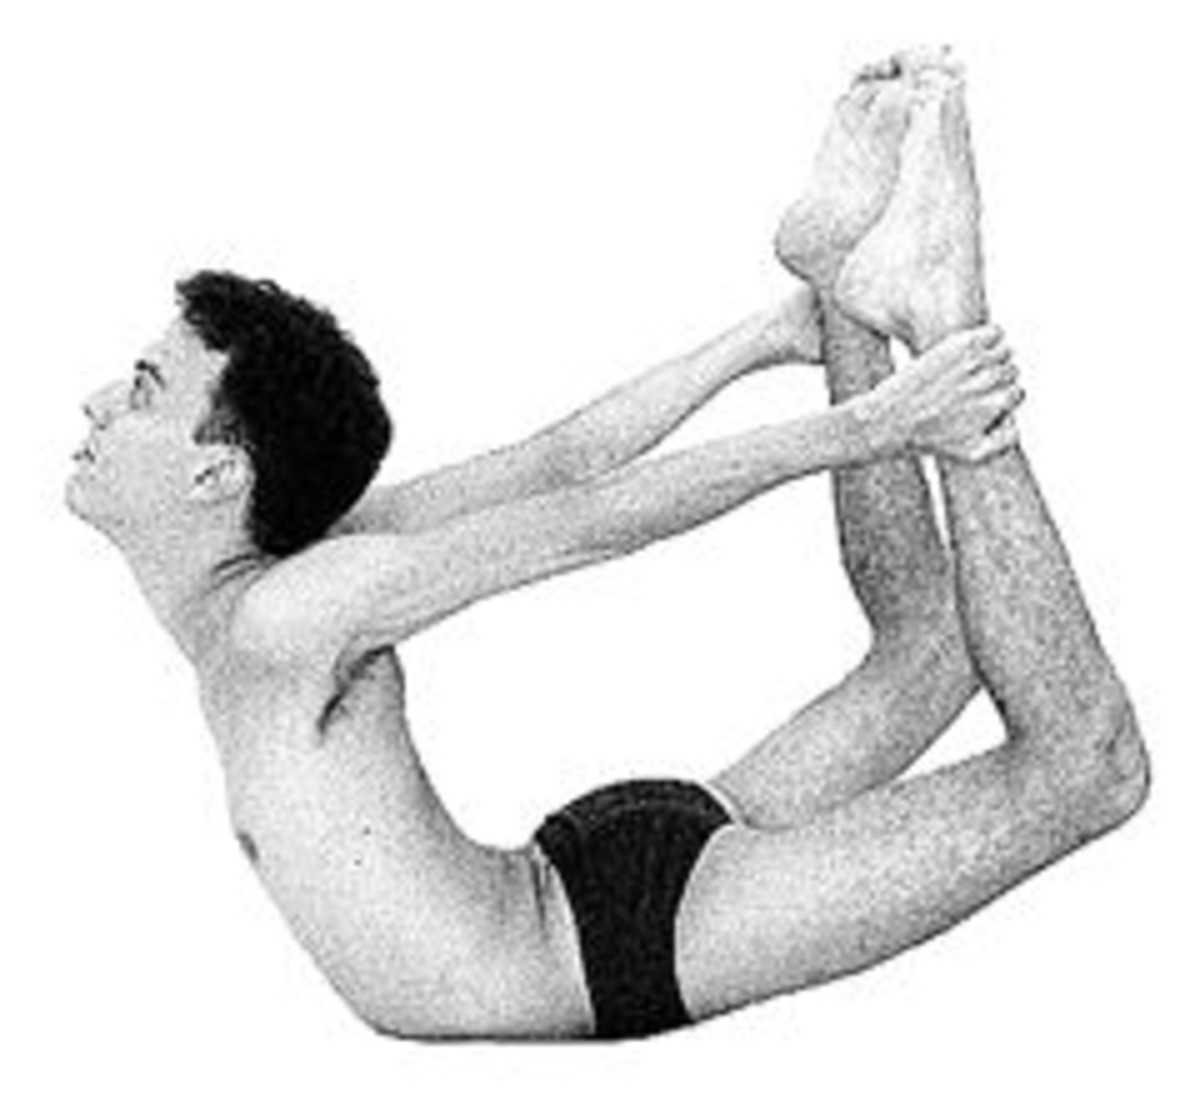 Yoga Poses for Shoulders: Relieve Tension and Stiff Neck